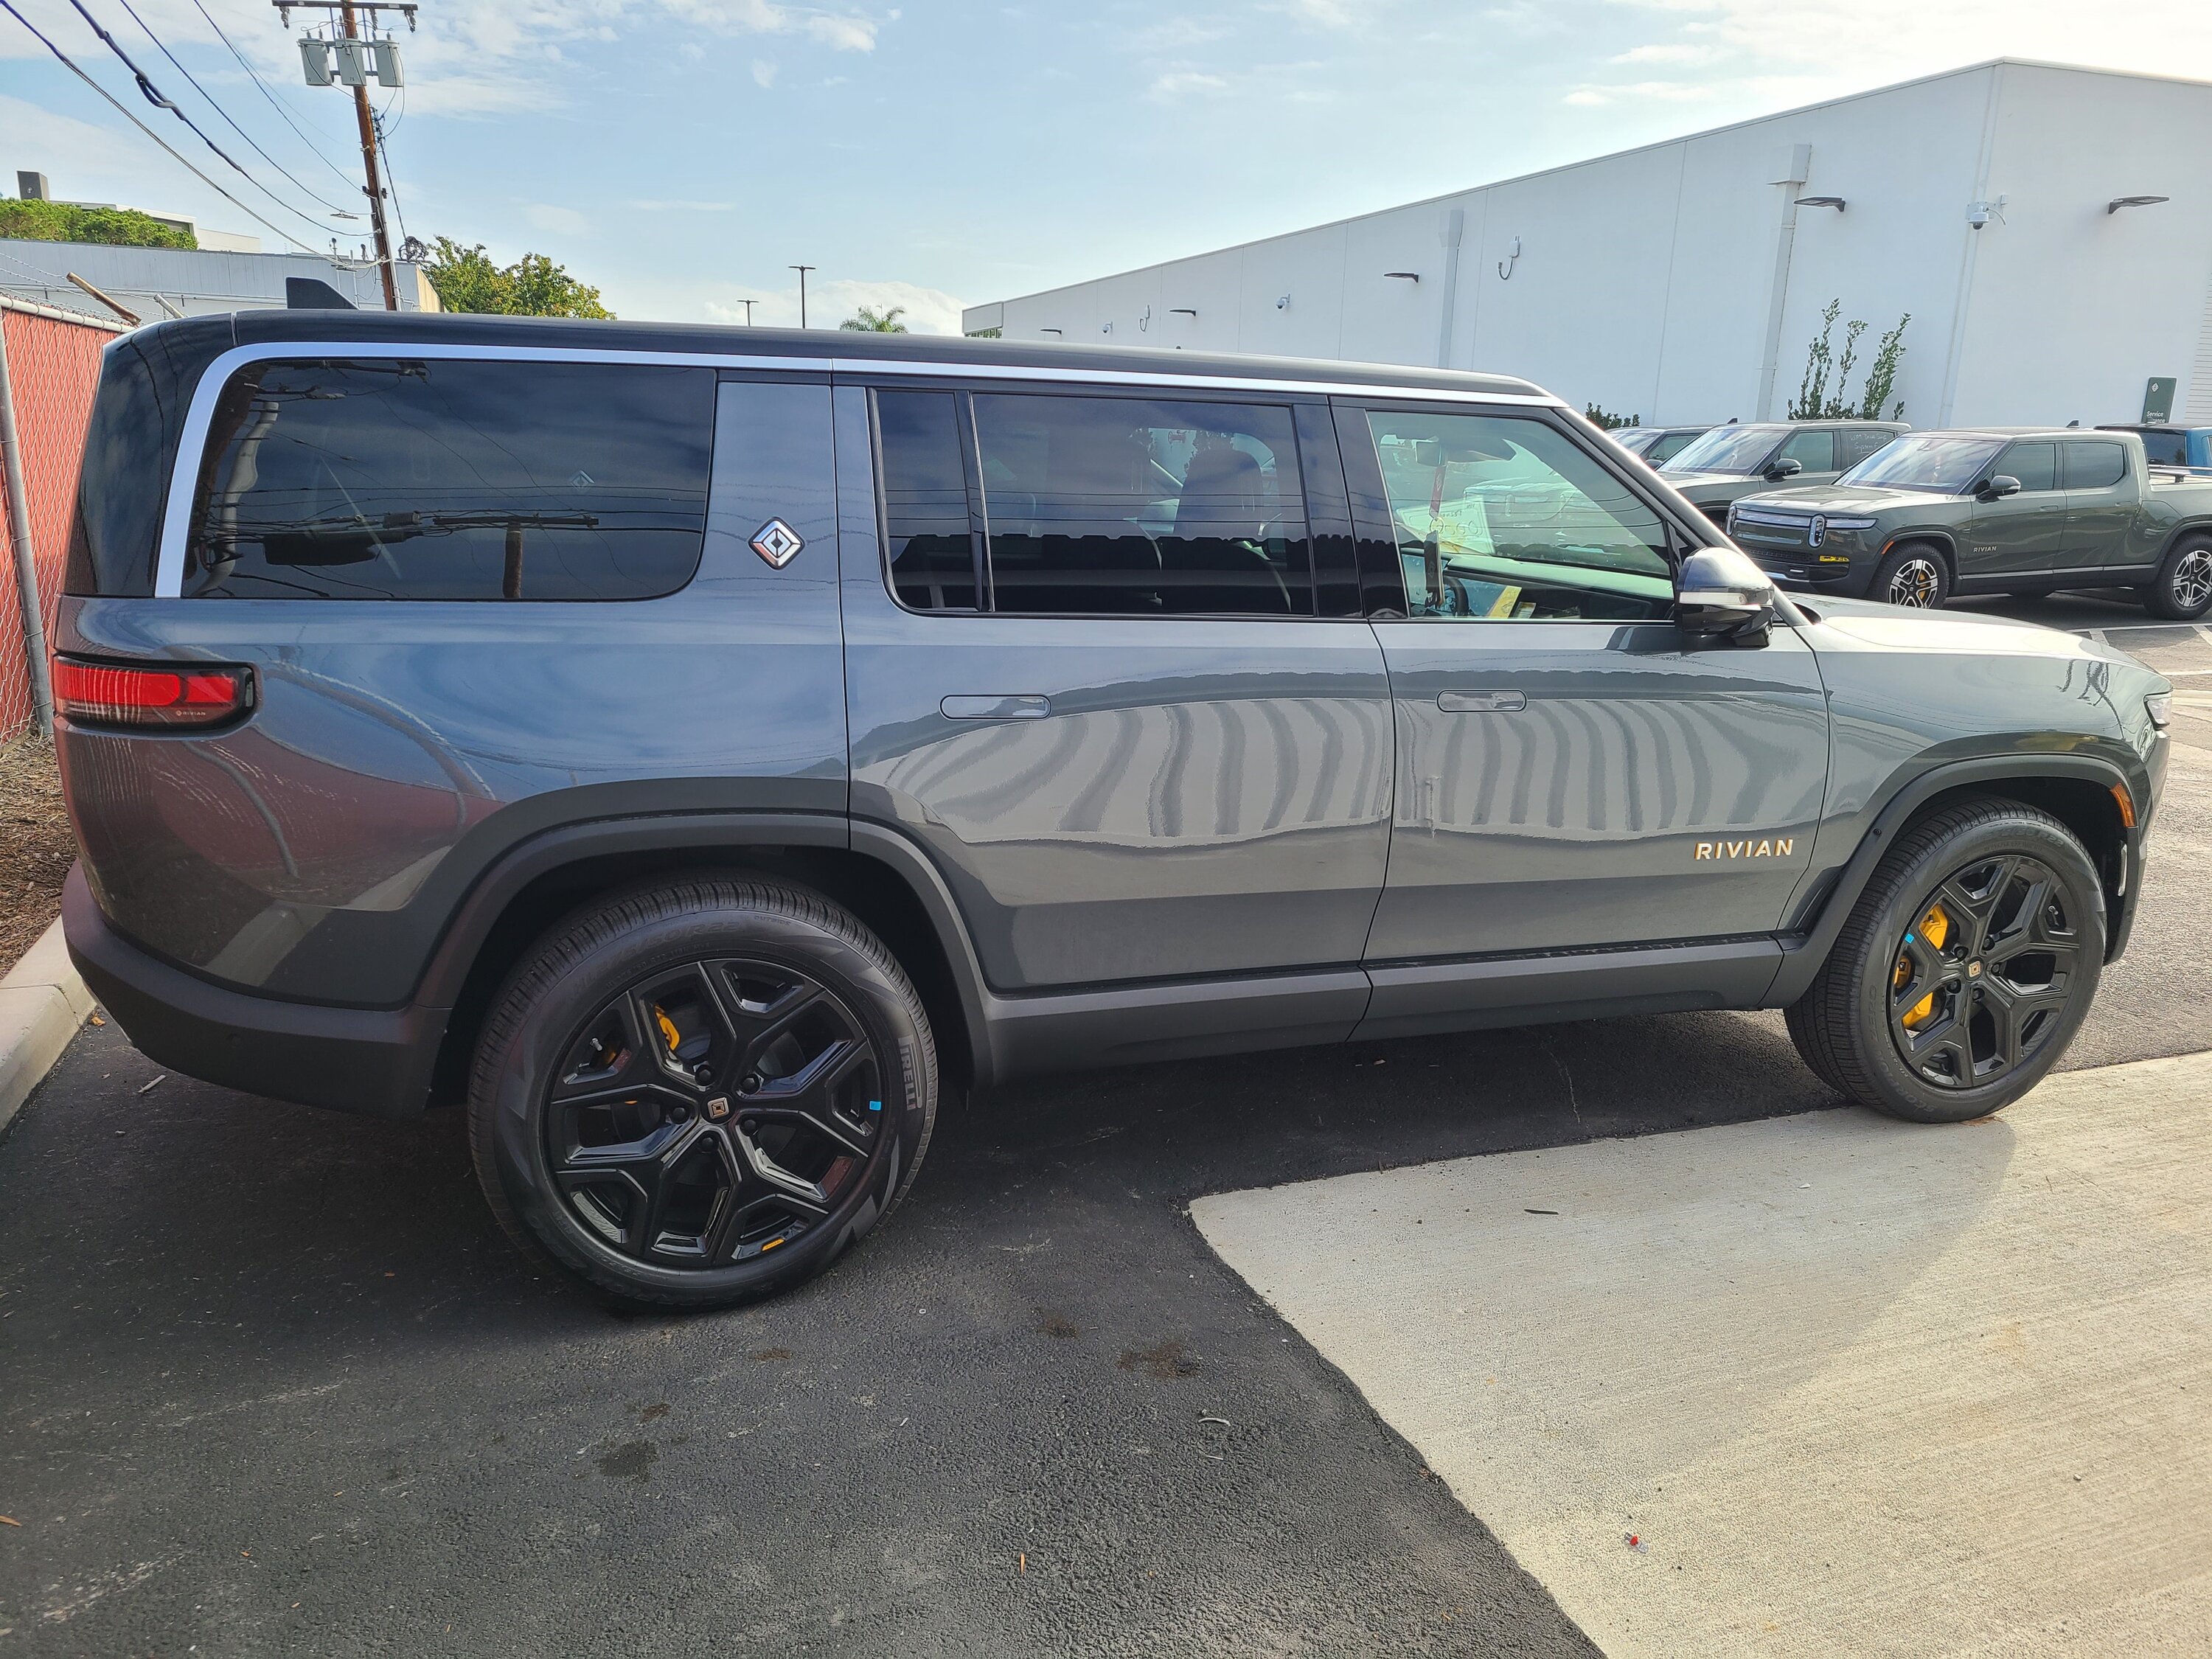 Rivian R1T R1S Any R1S pre-orders hear from guides recently? ElCap5